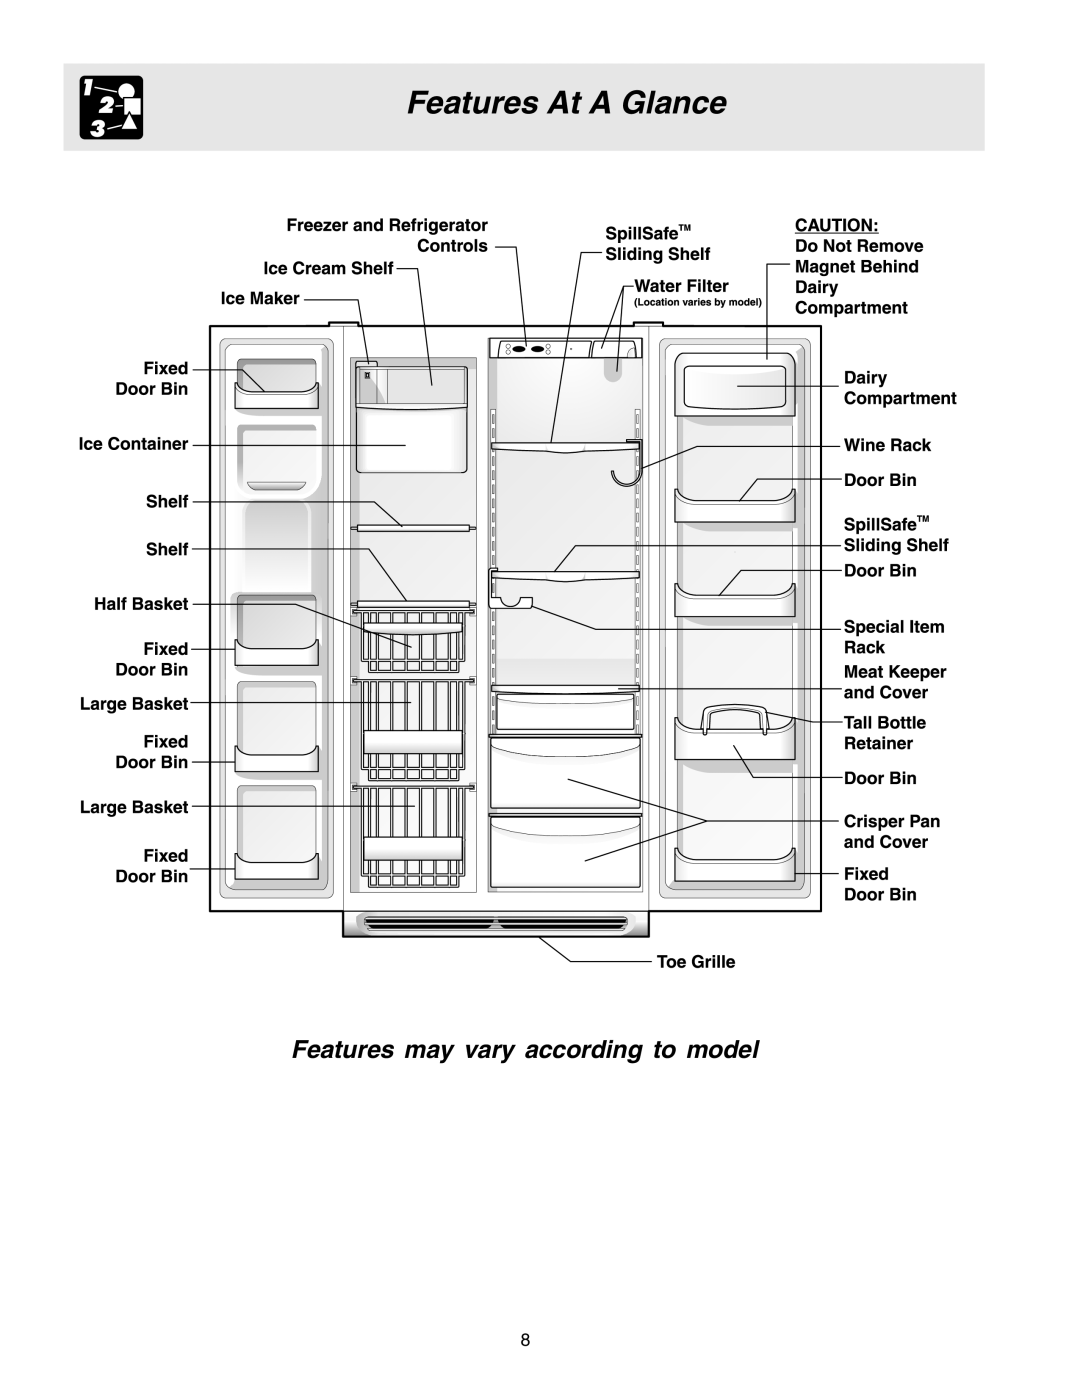 Electrolux U27107 manual Features At A Glance, Features may vary according to model 